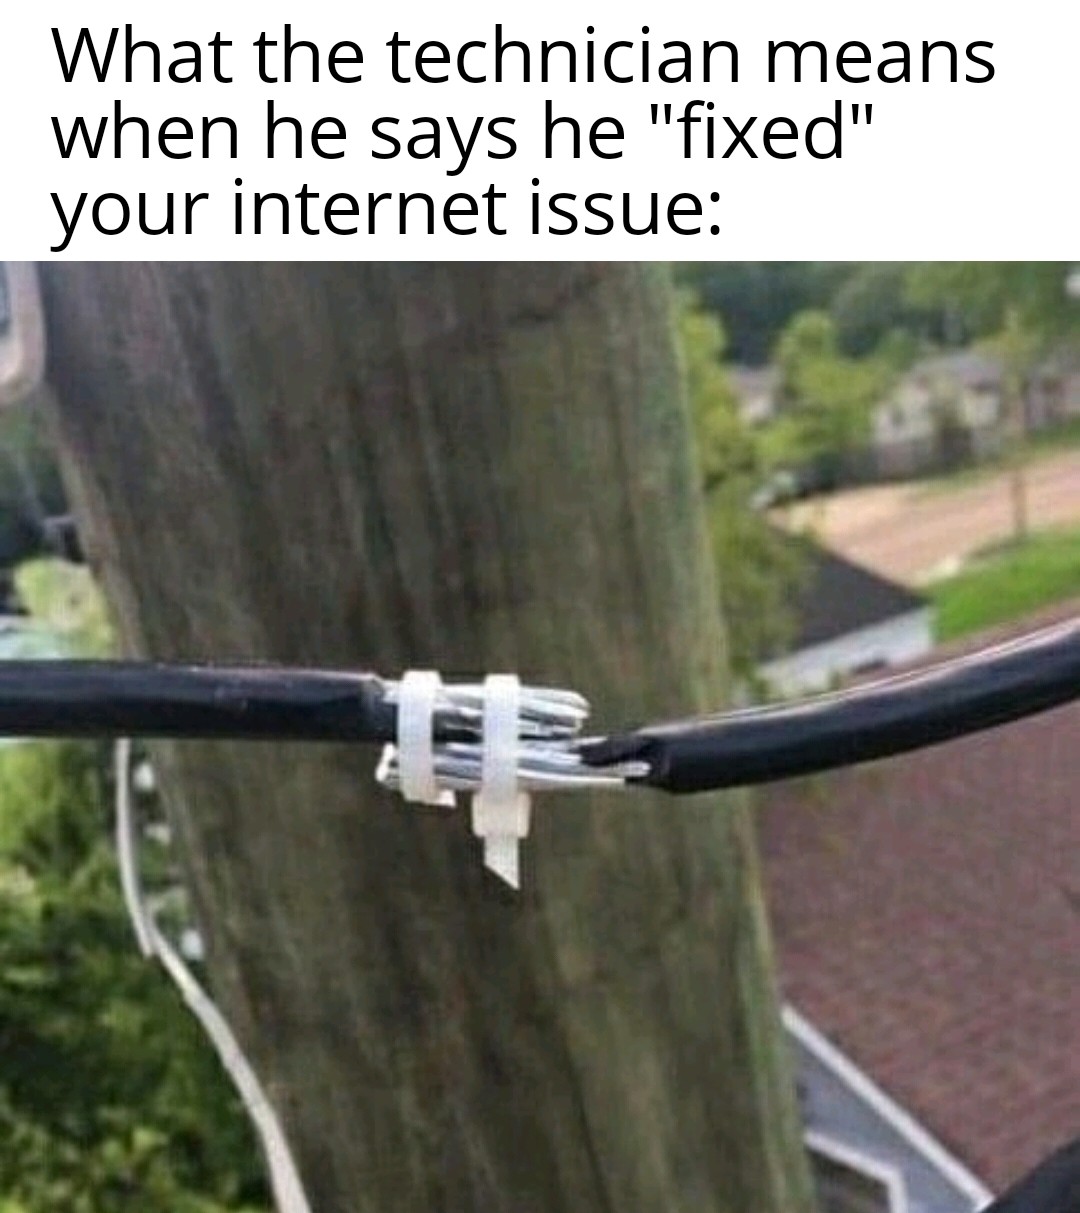 What the technician means when he says he "fixed" your internet issue